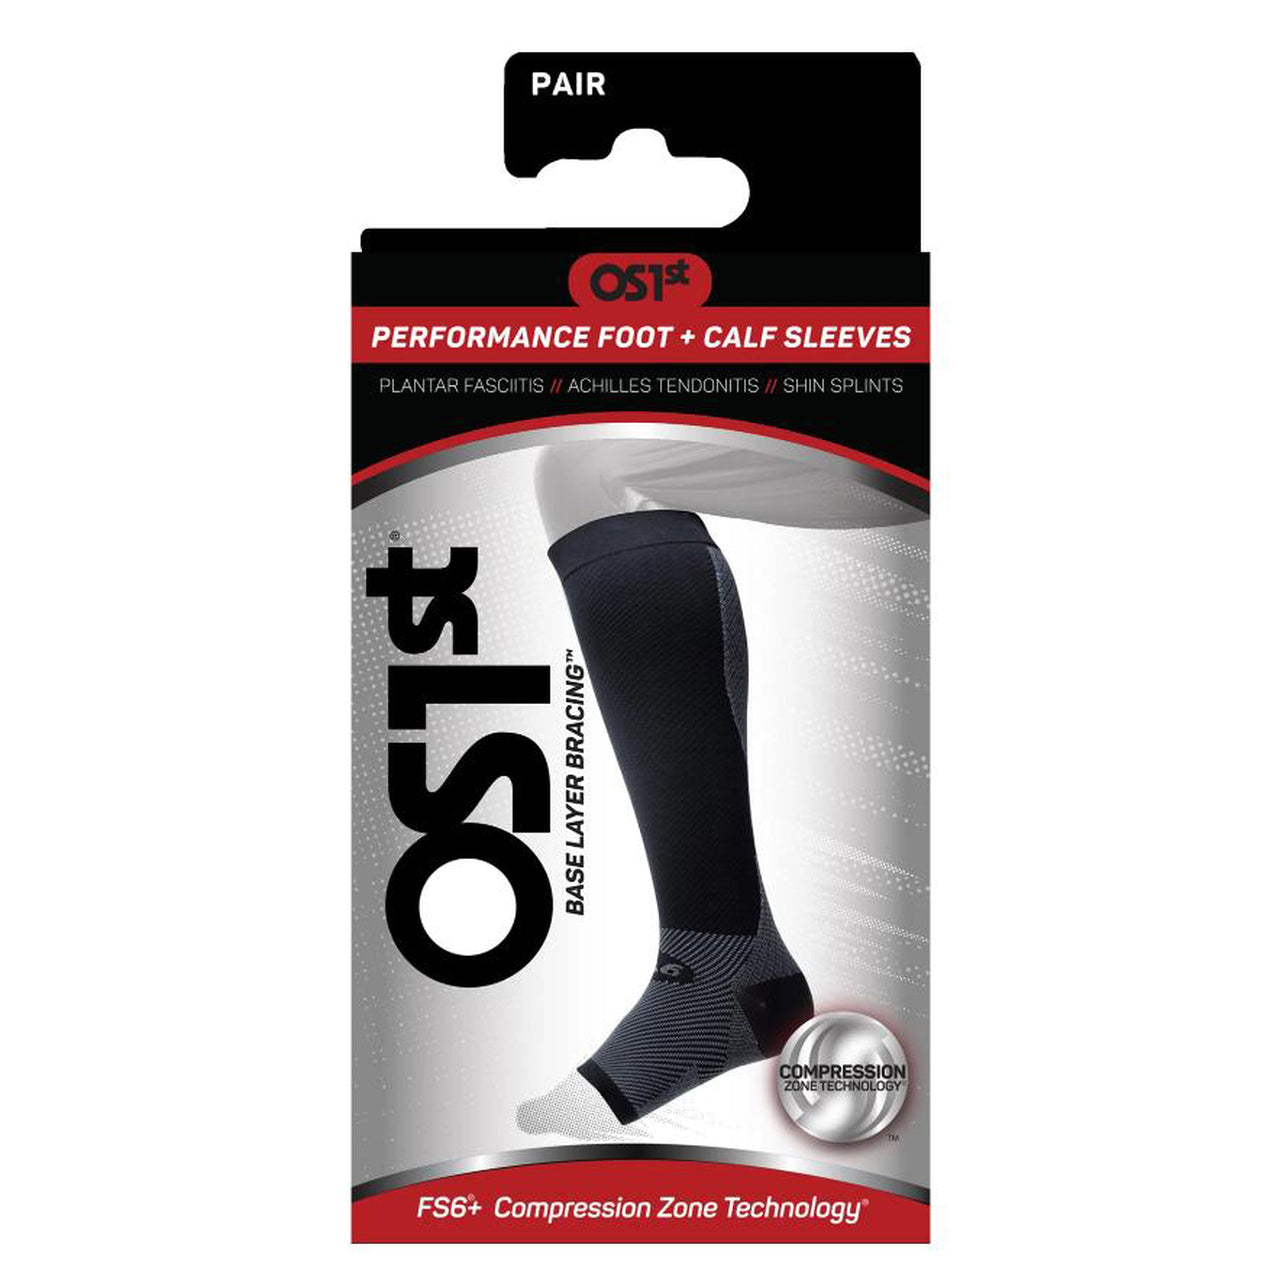 OS1st FS6 Sports Compression Foot Sleeves (Pair) 